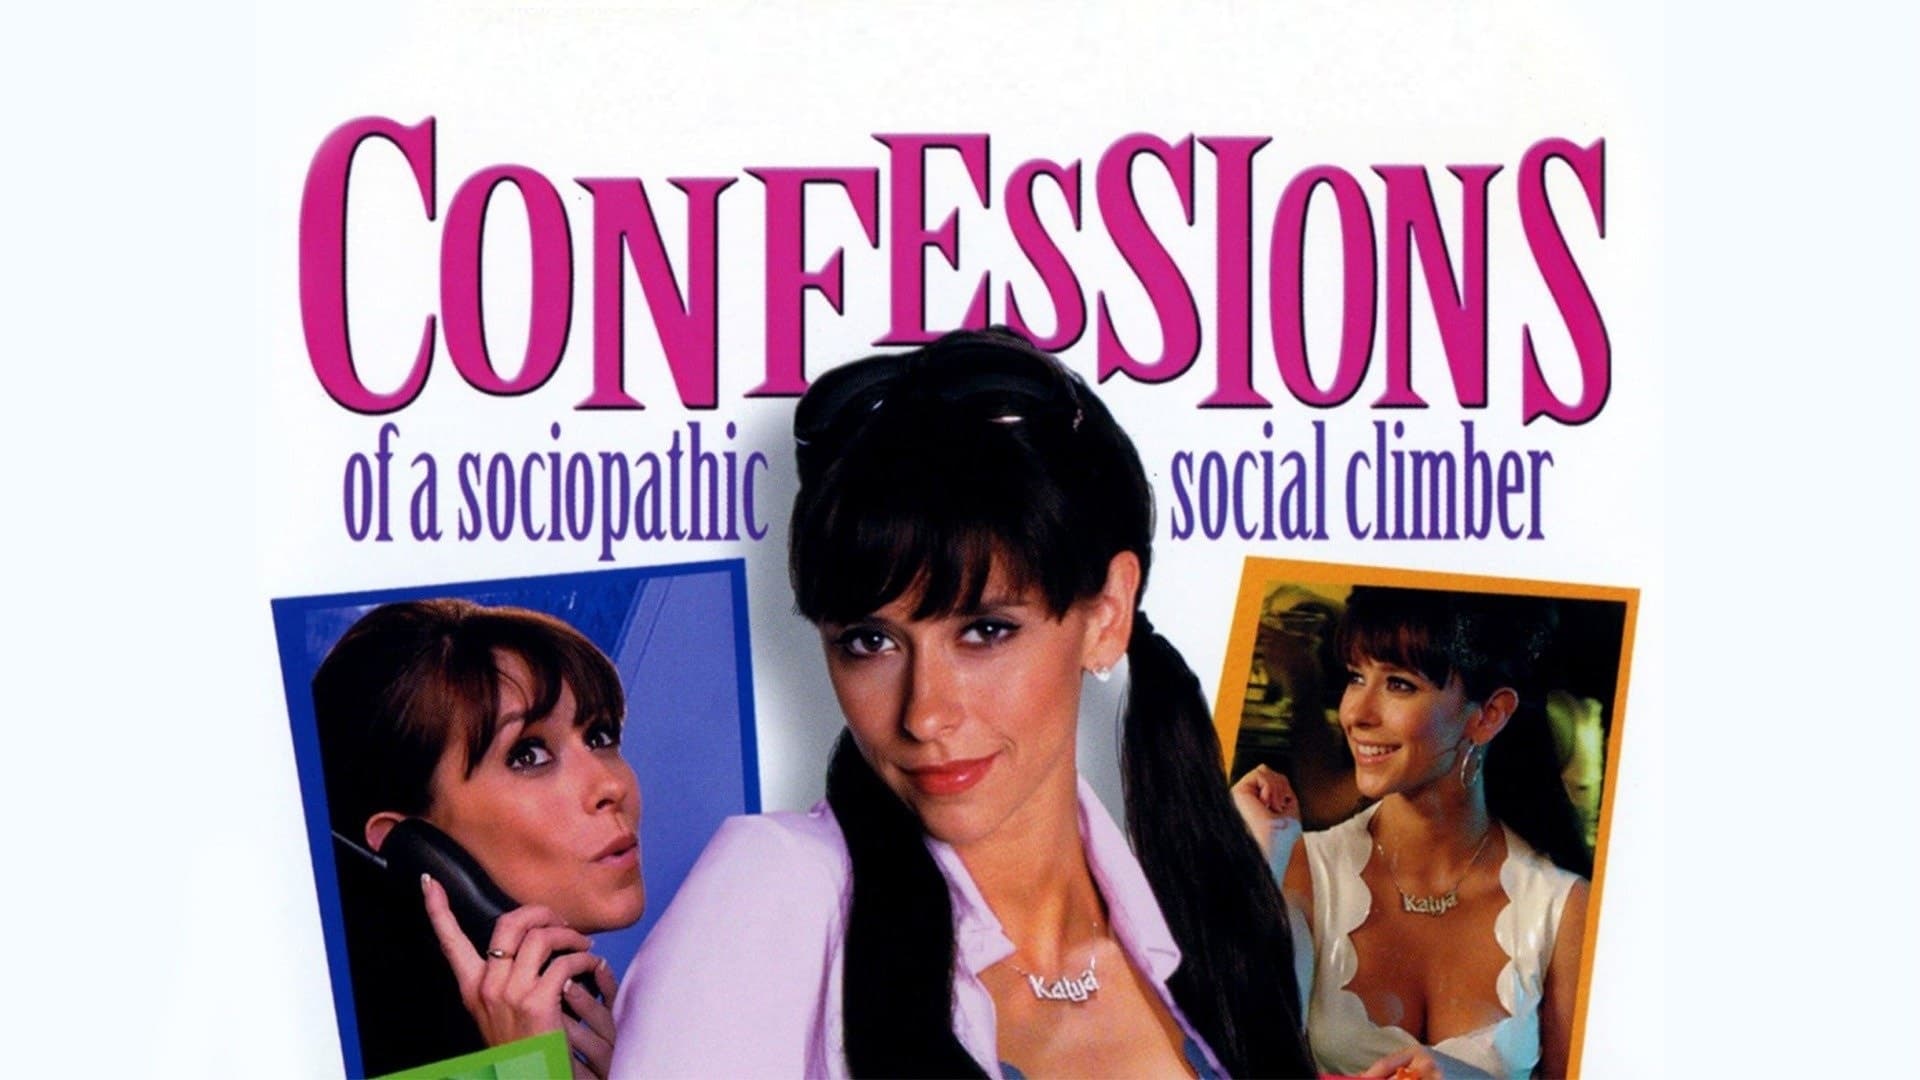 Confessions of a Sociopathic Social Climber (2005)